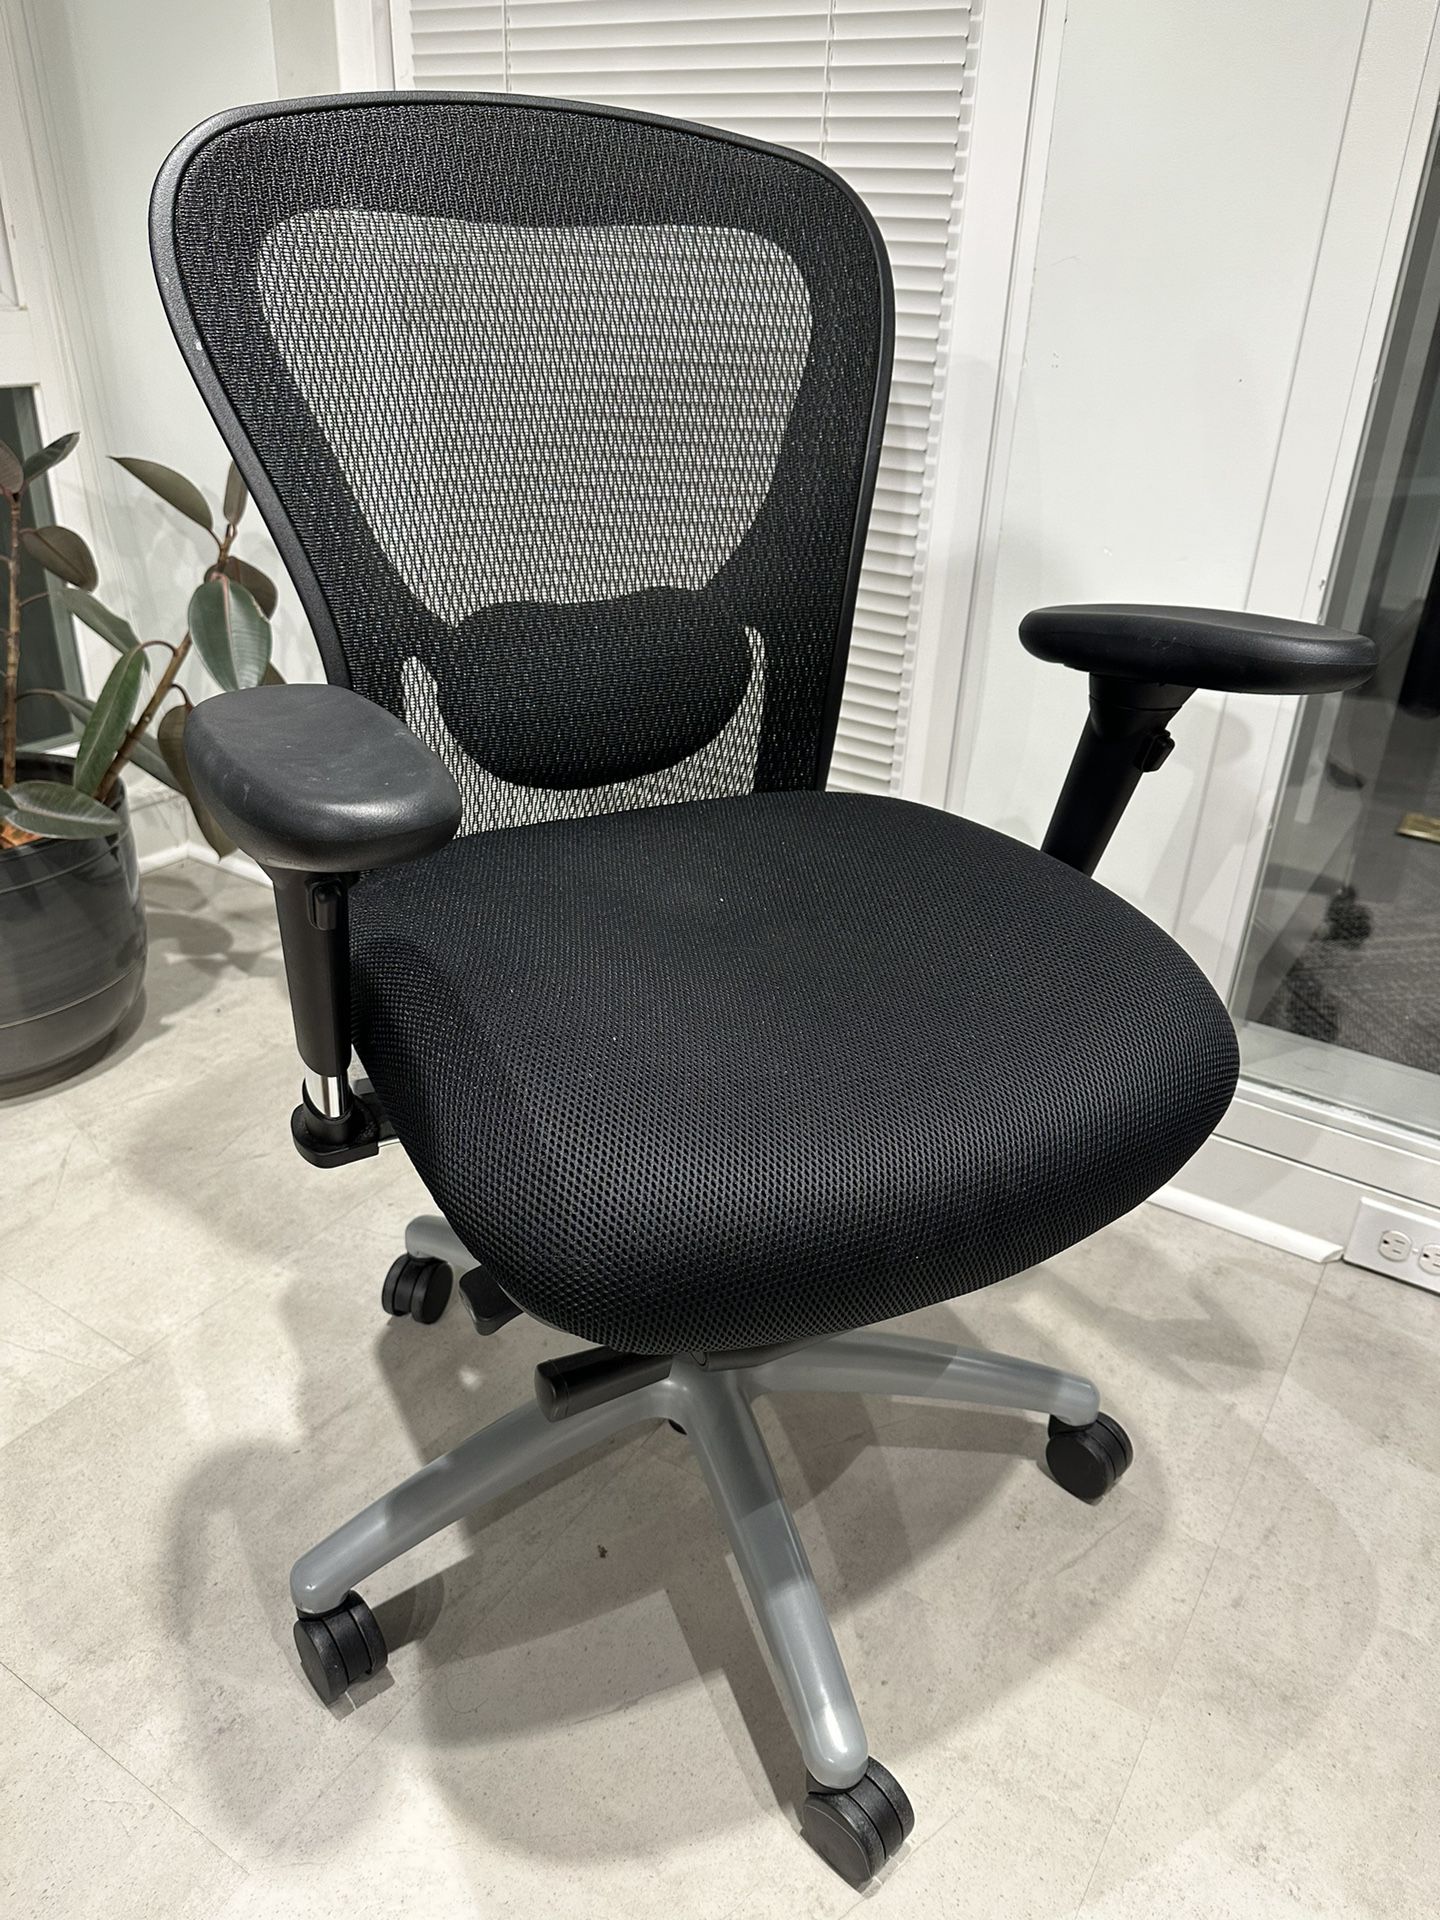 9to5 Office Chair